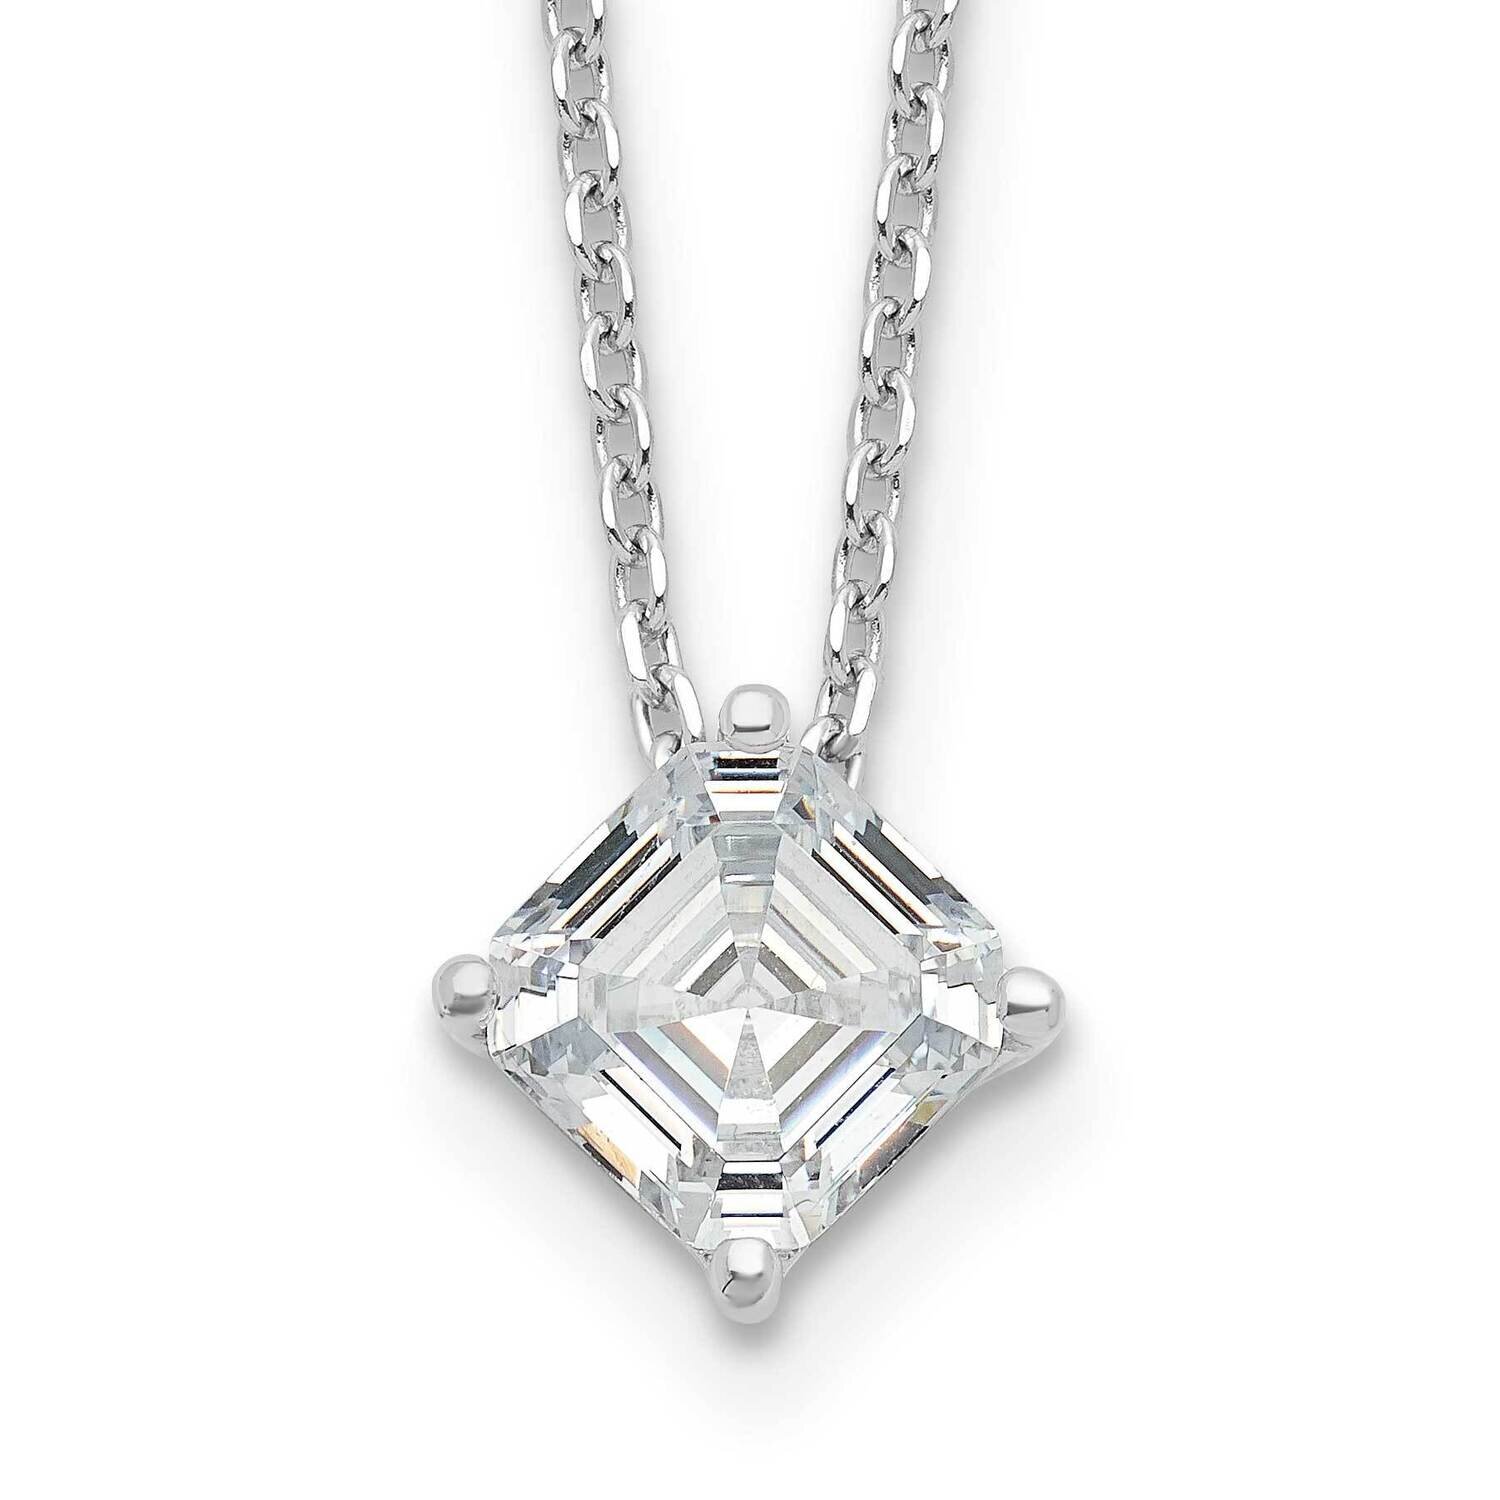 Cheryl M Rhodium-Plated Square CZ Diamond with 2.5 Inch Ext. Necklace Sterling Silver QCM1556-16